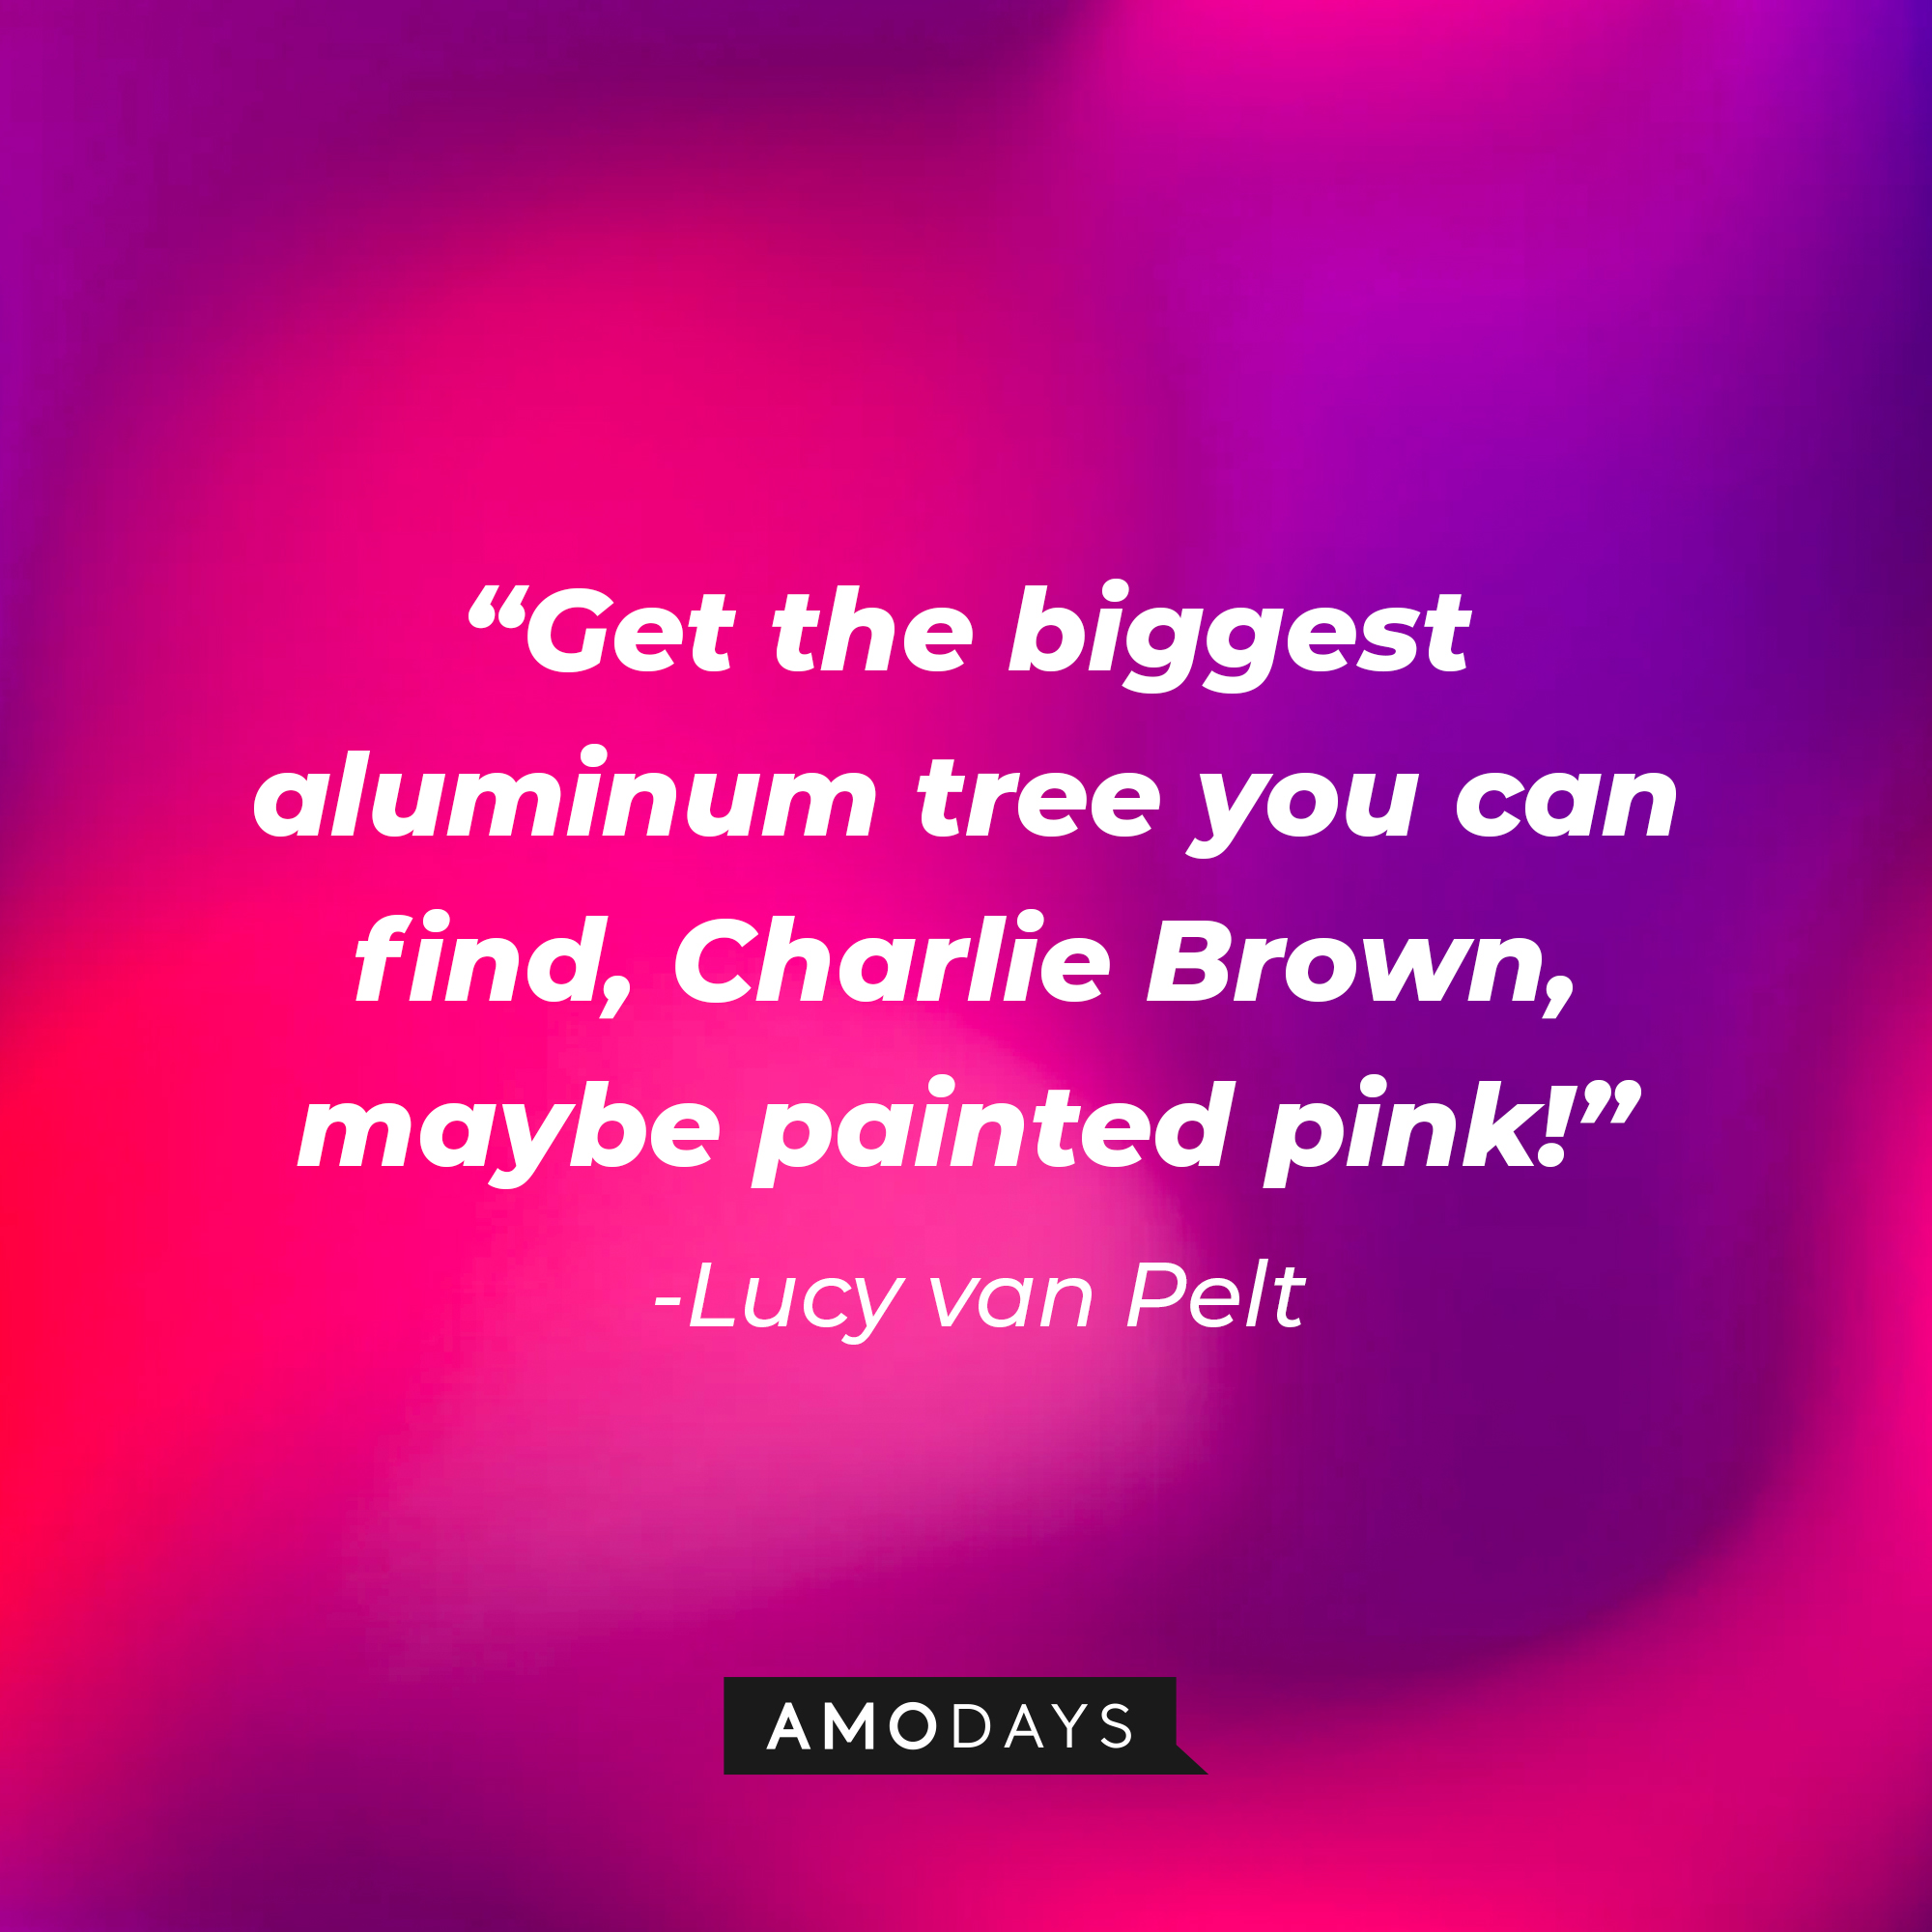 Lucy Van Pelt's quote: "Get the biggest aluminum tree you can find, Charlie Brown, maybe painted pink!" | Source: Amodays